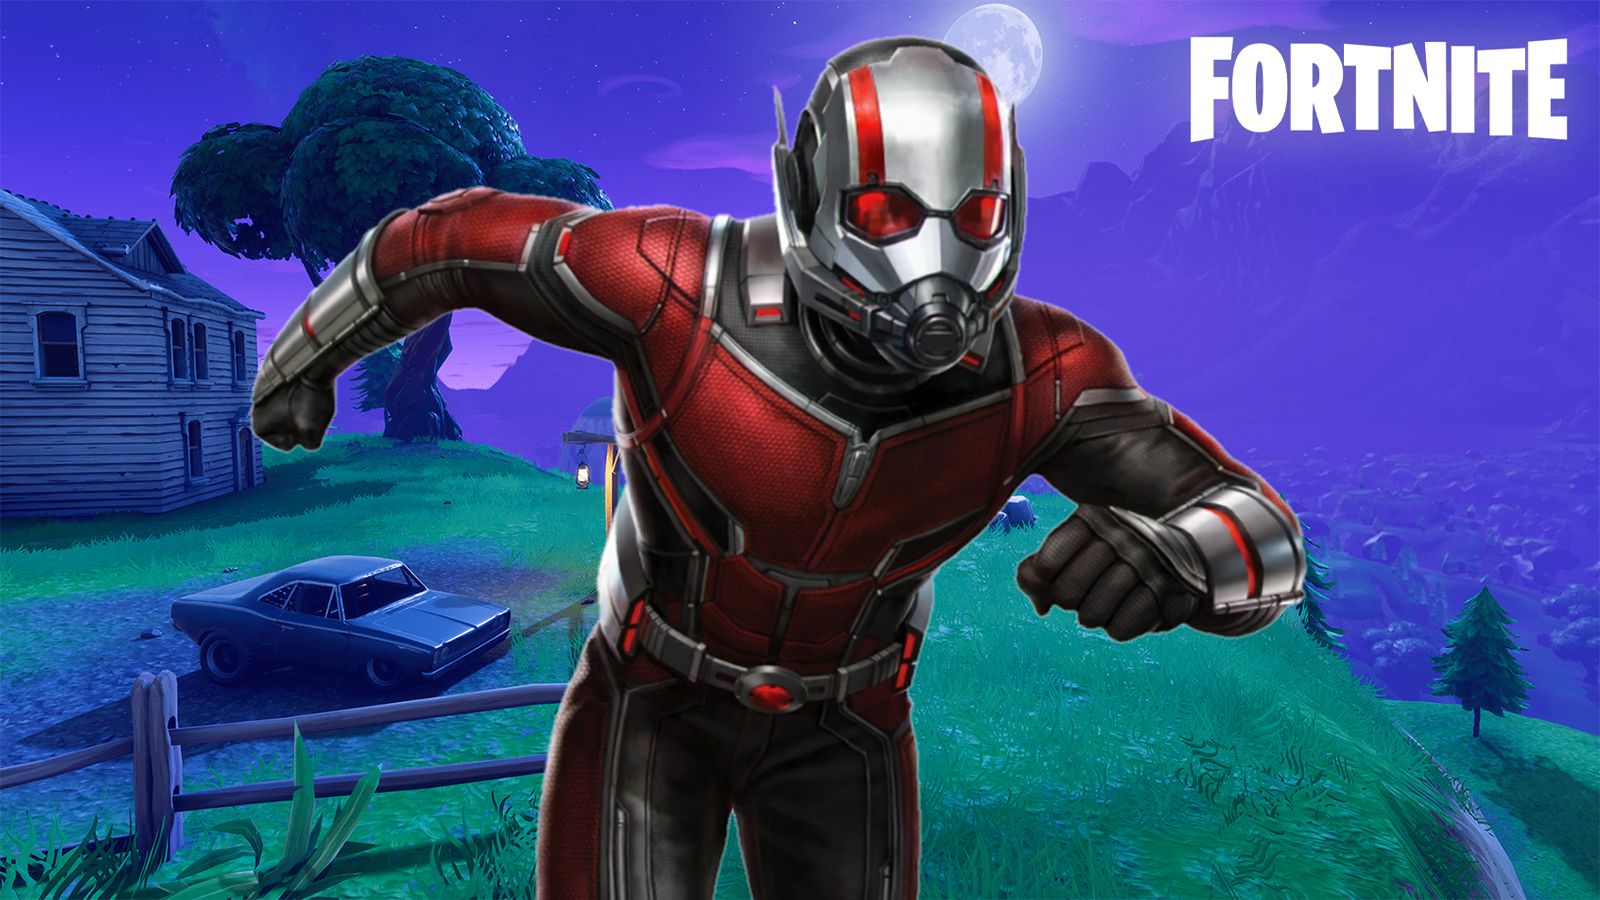 Fortnite Ant Man Skin Leaks Continue As Epic Teases Next Marvel Crossover